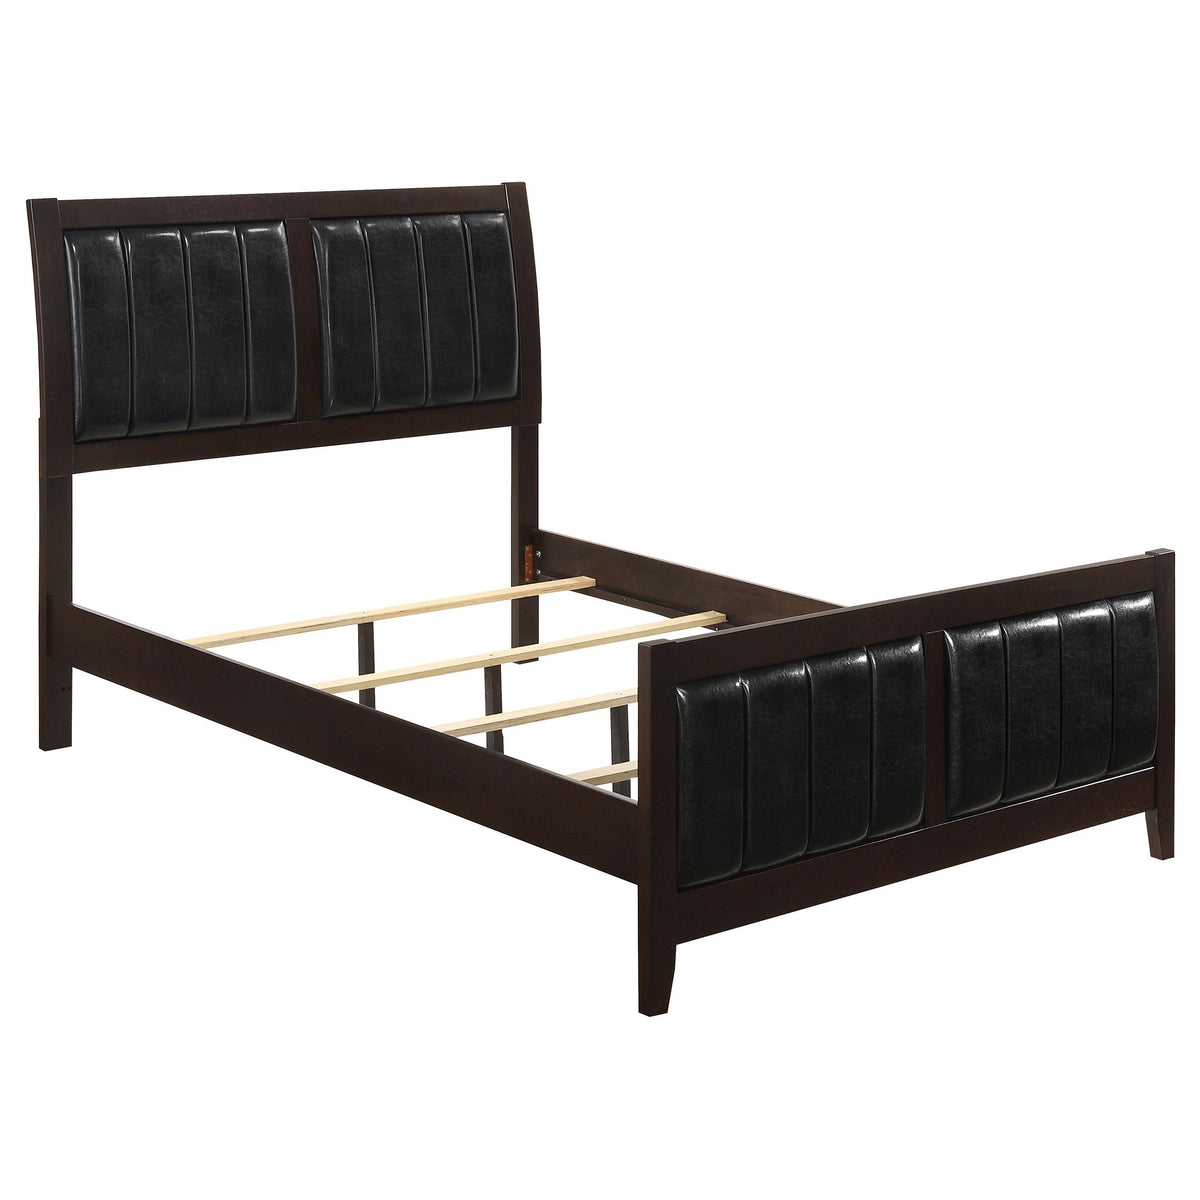 Carlton California King Upholstered Bed Cappuccino and Black  Las Vegas Furniture Stores